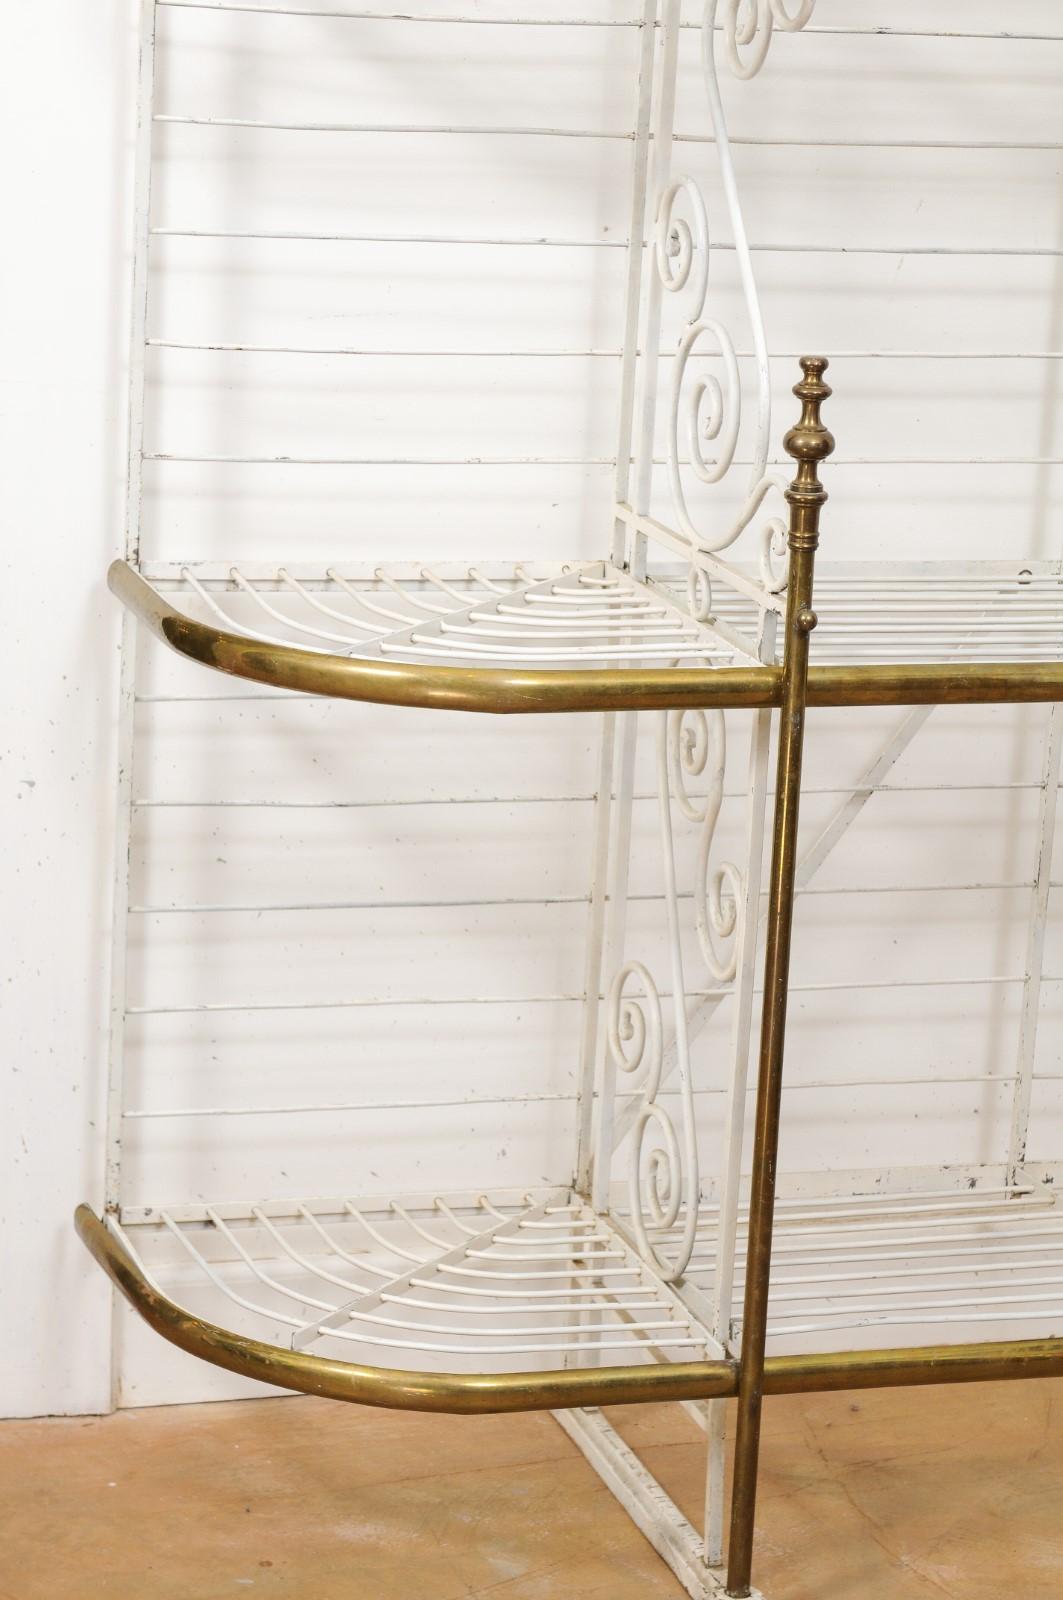 19th Century French Belle Époque 1890s White Painted Metal Baker’s Rack with Brass Accents